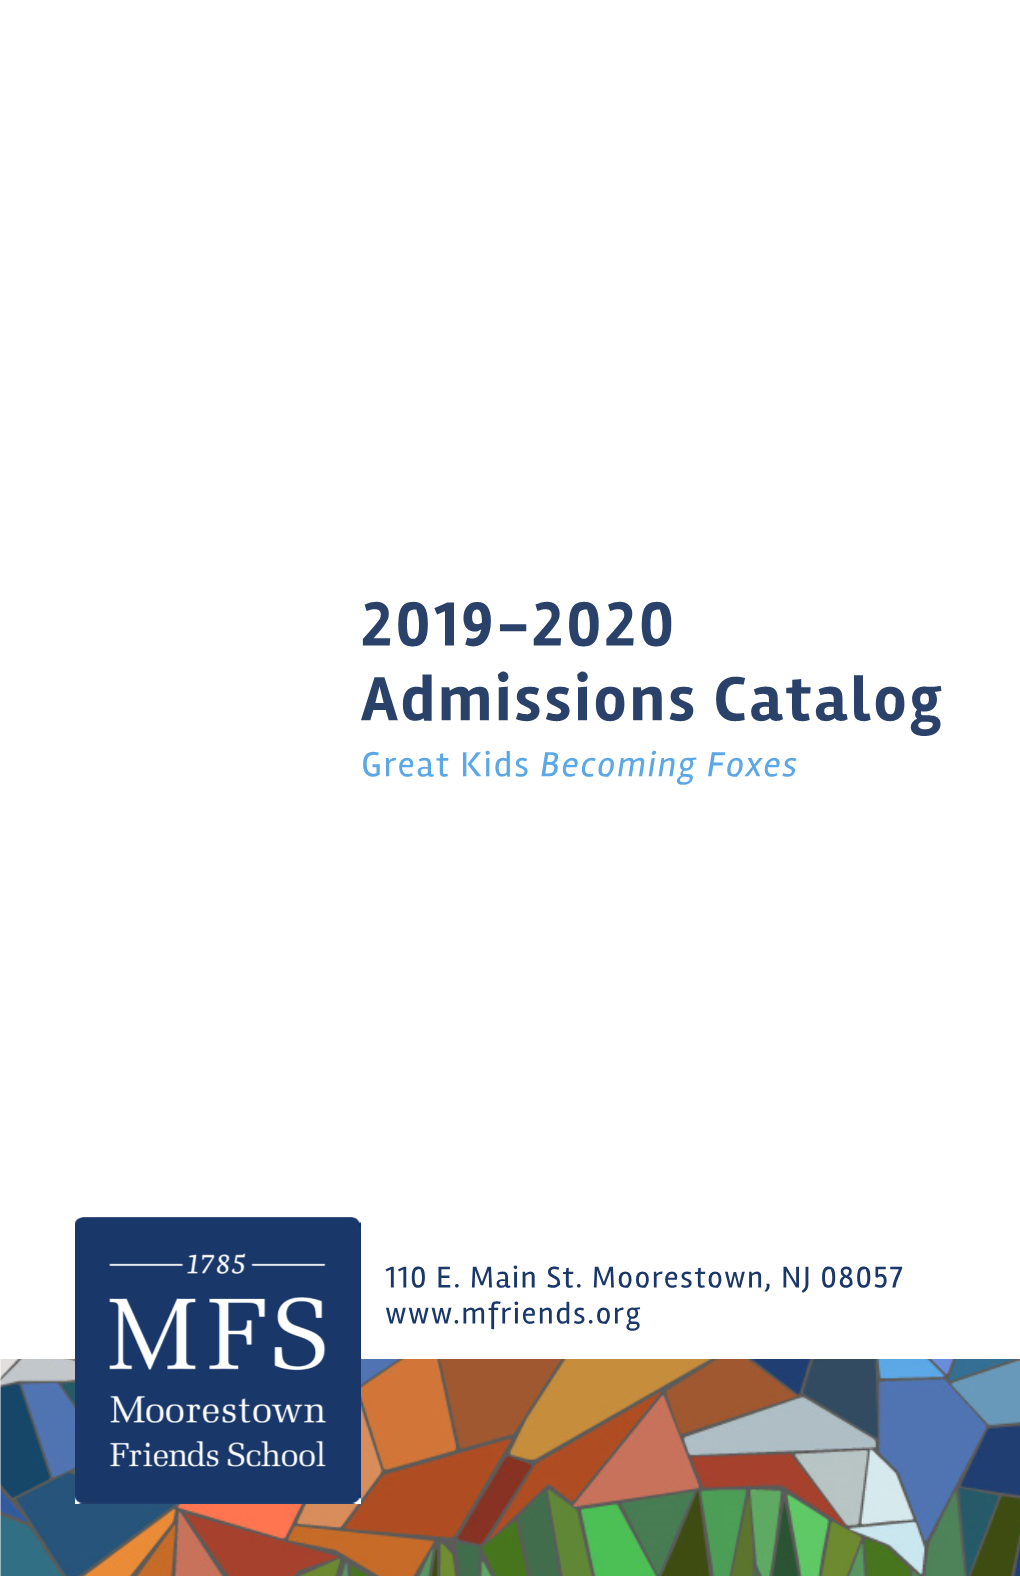 2019-2020 Admissions Catalog Great Kids Becoming Foxes